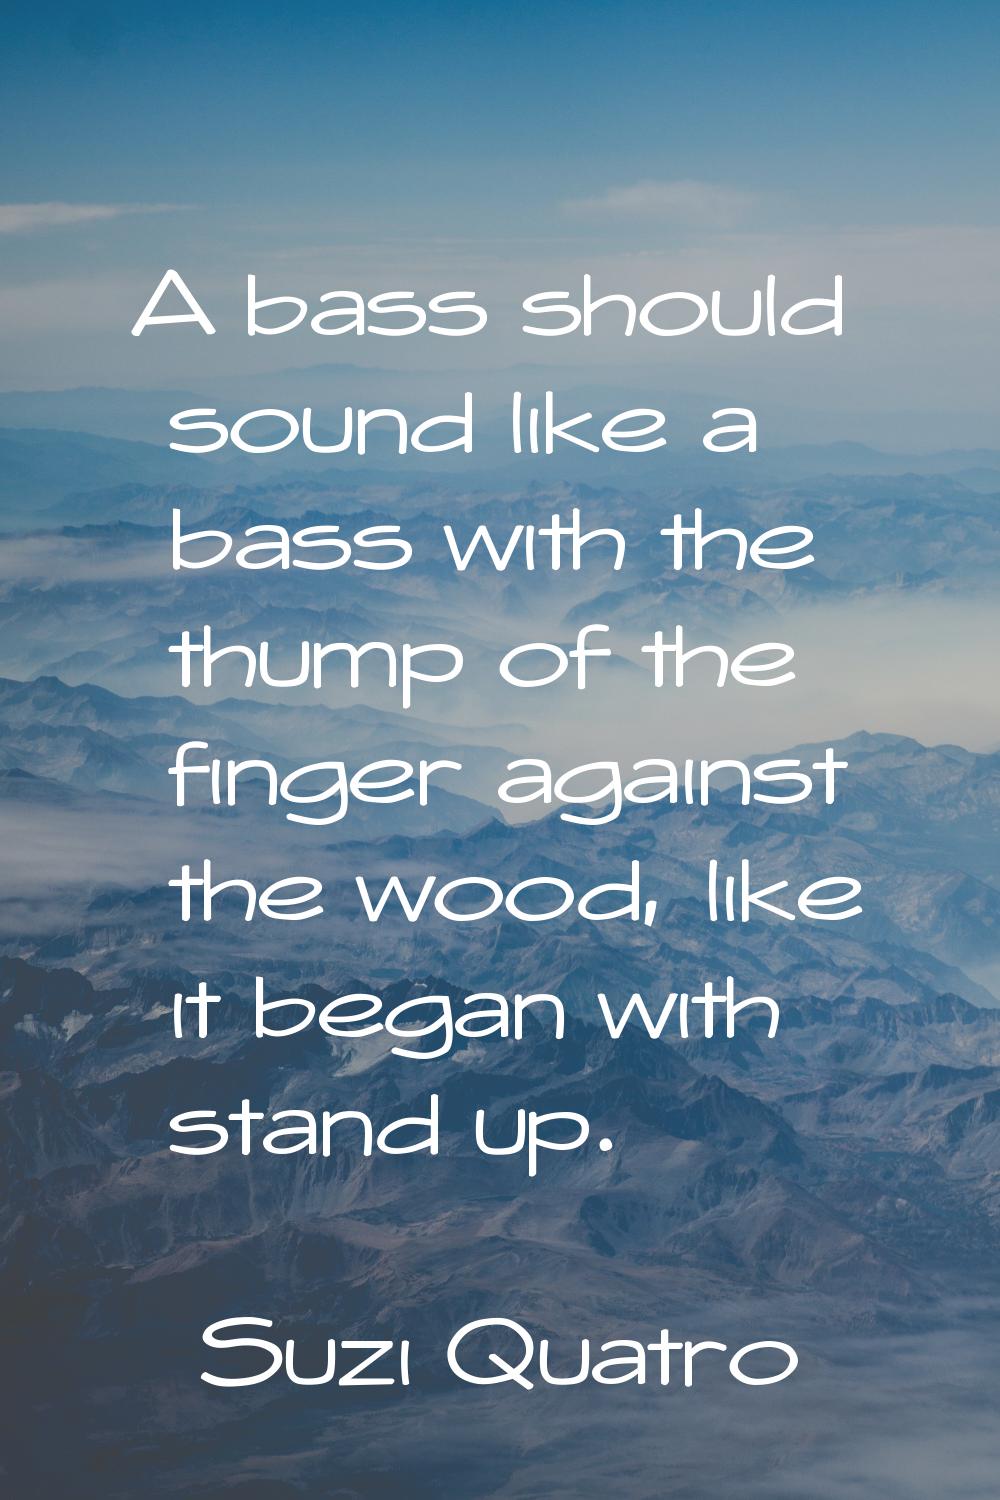 A bass should sound like a bass with the thump of the finger against the wood, like it began with s